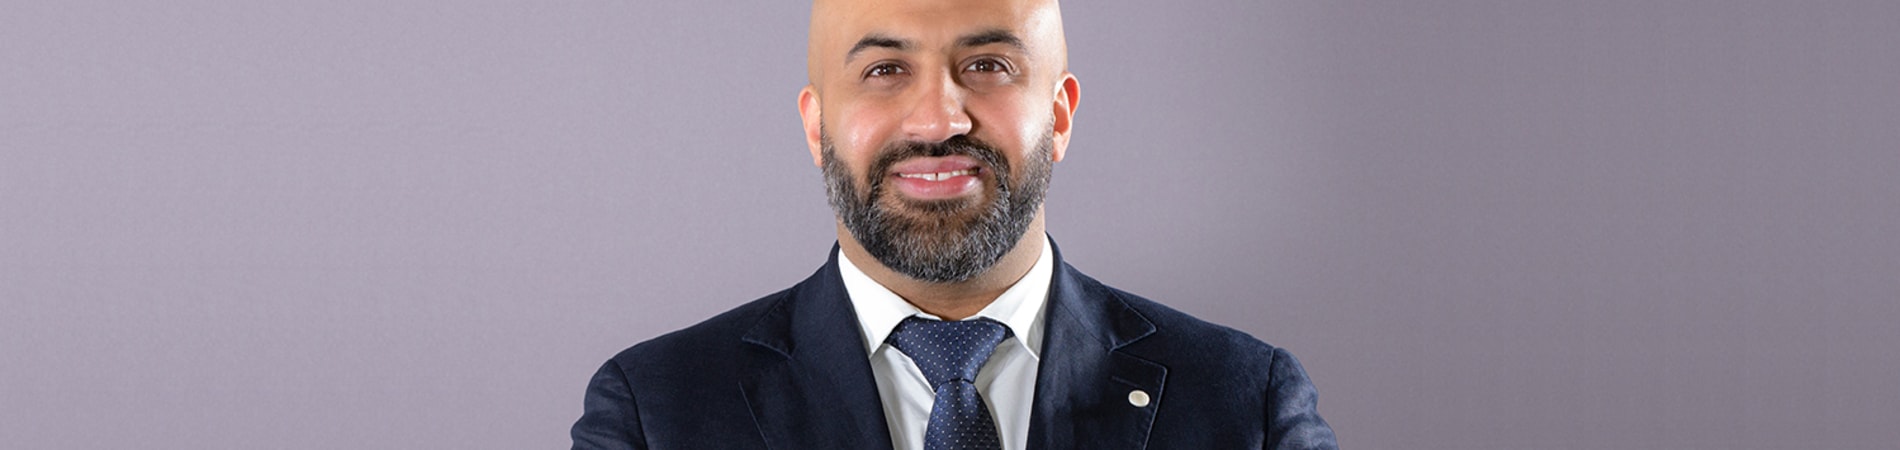 Marshalls invests in its digital future with new appointment Adil Jan